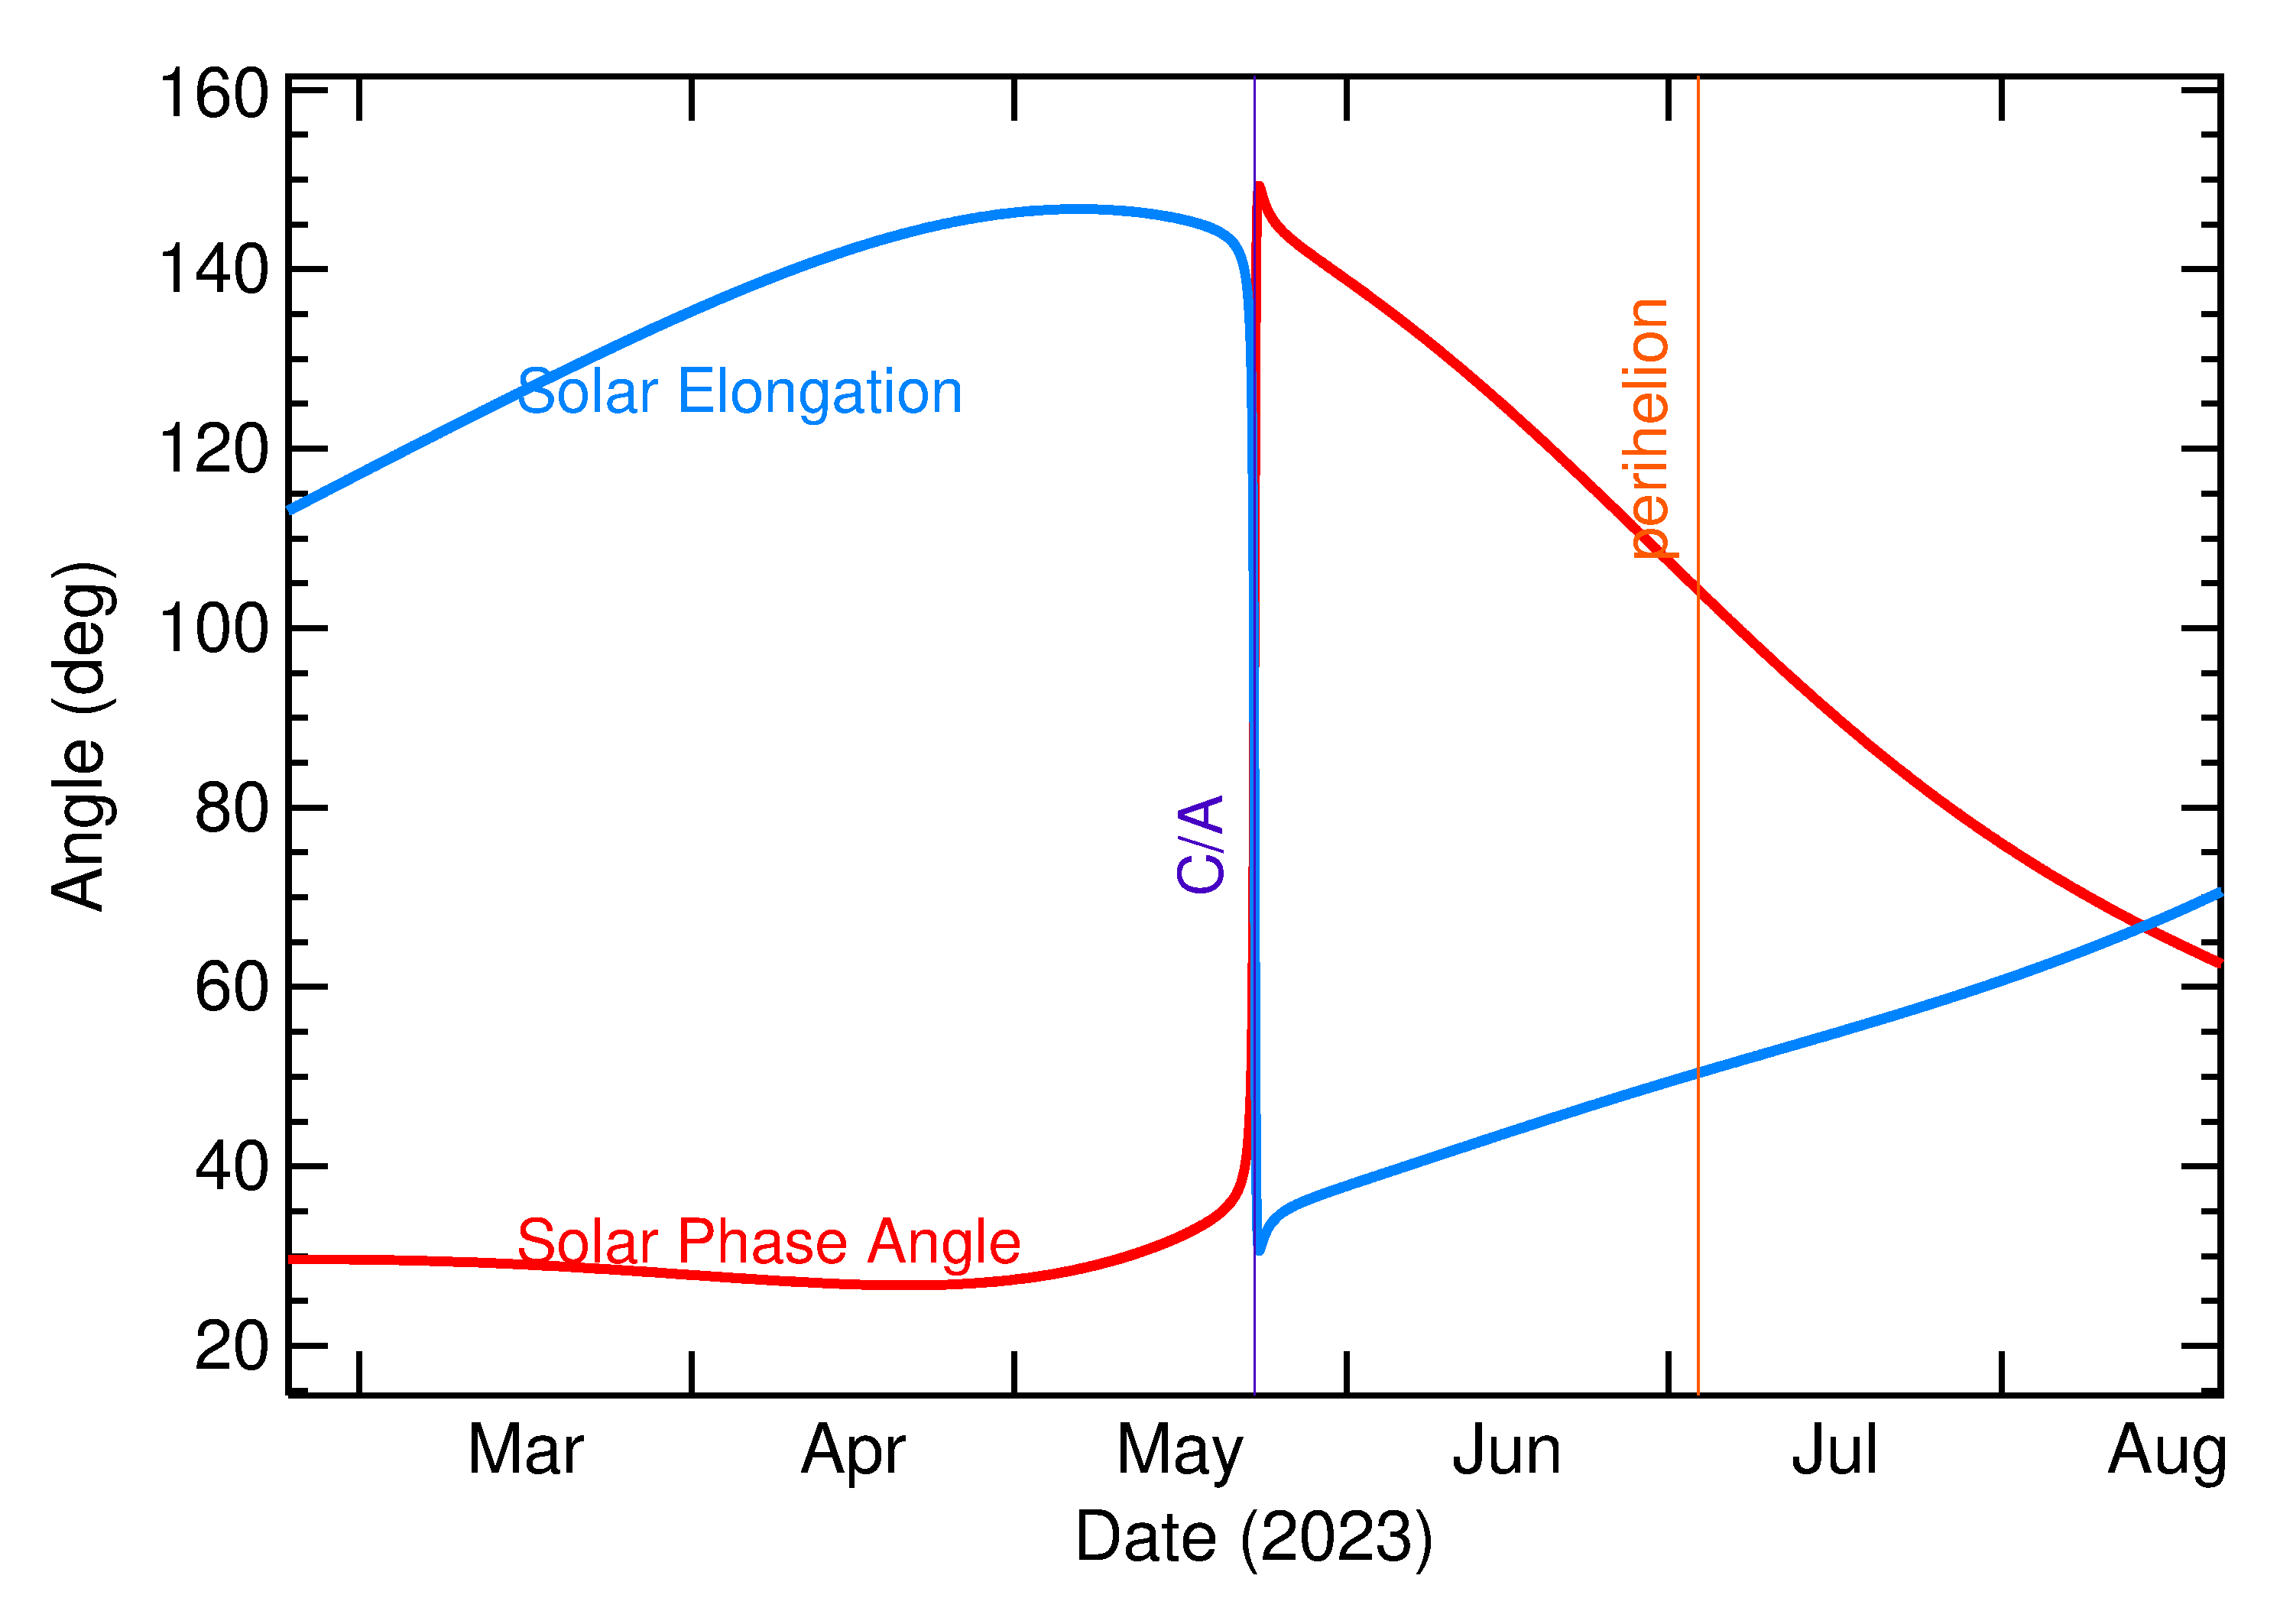 Solar Elongation and Solar Phase Angle of 2023 KS in the months around closest approach